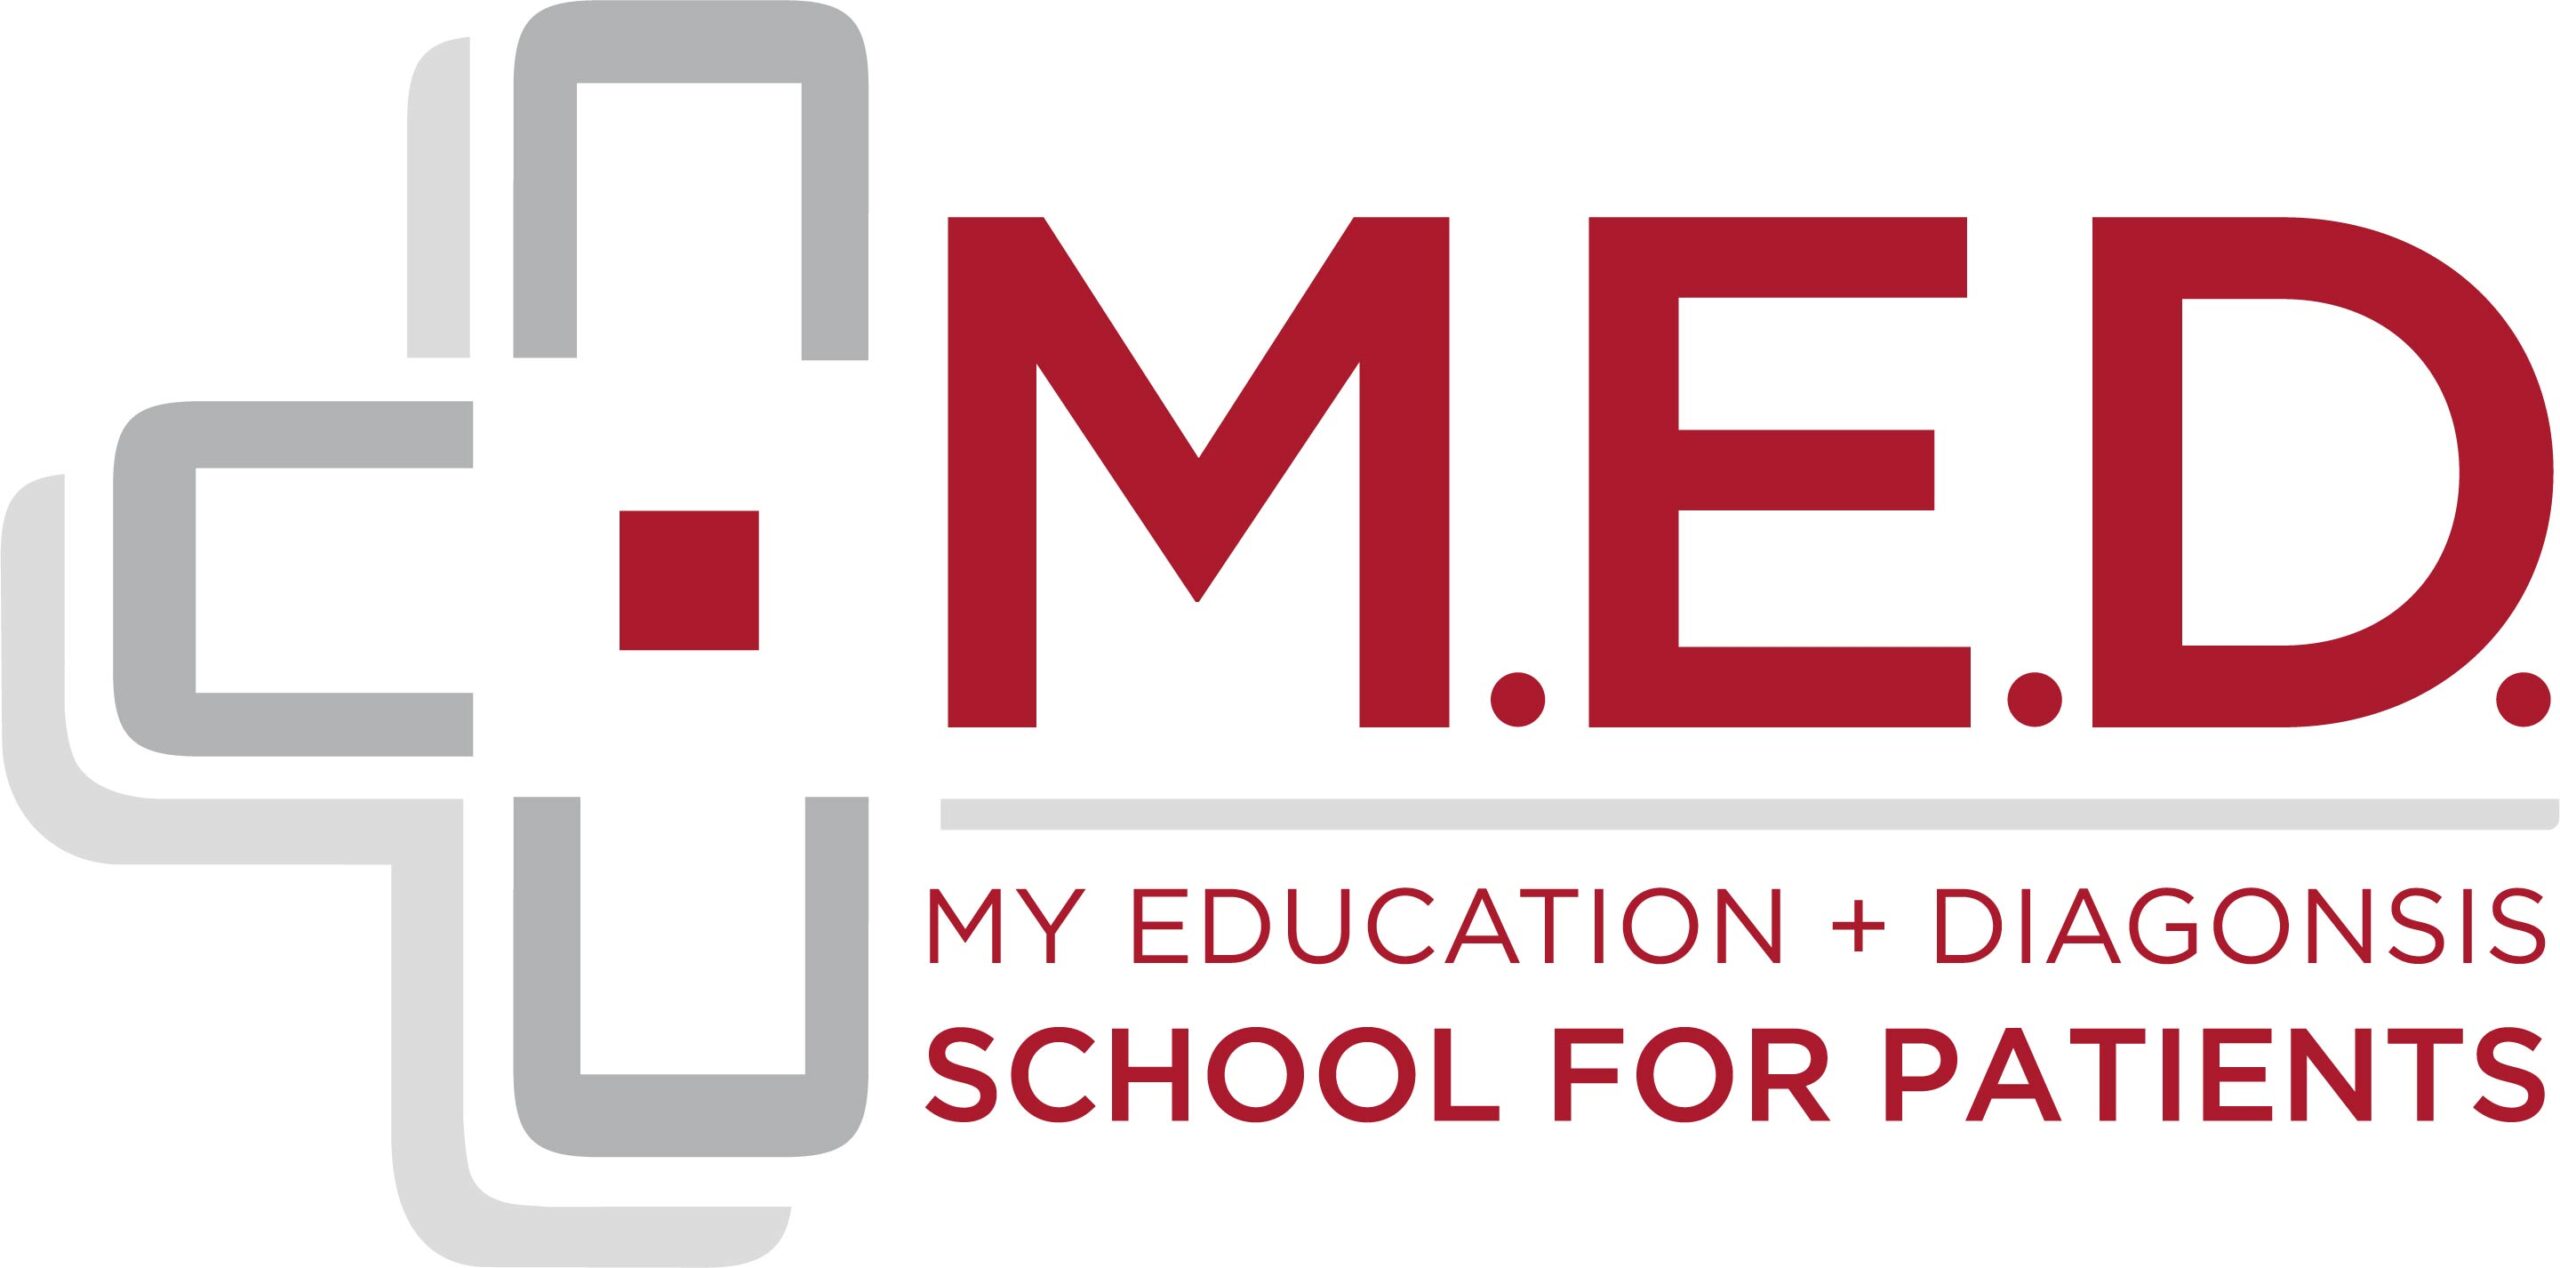 My Education and Diagnosis School for Patients Logo